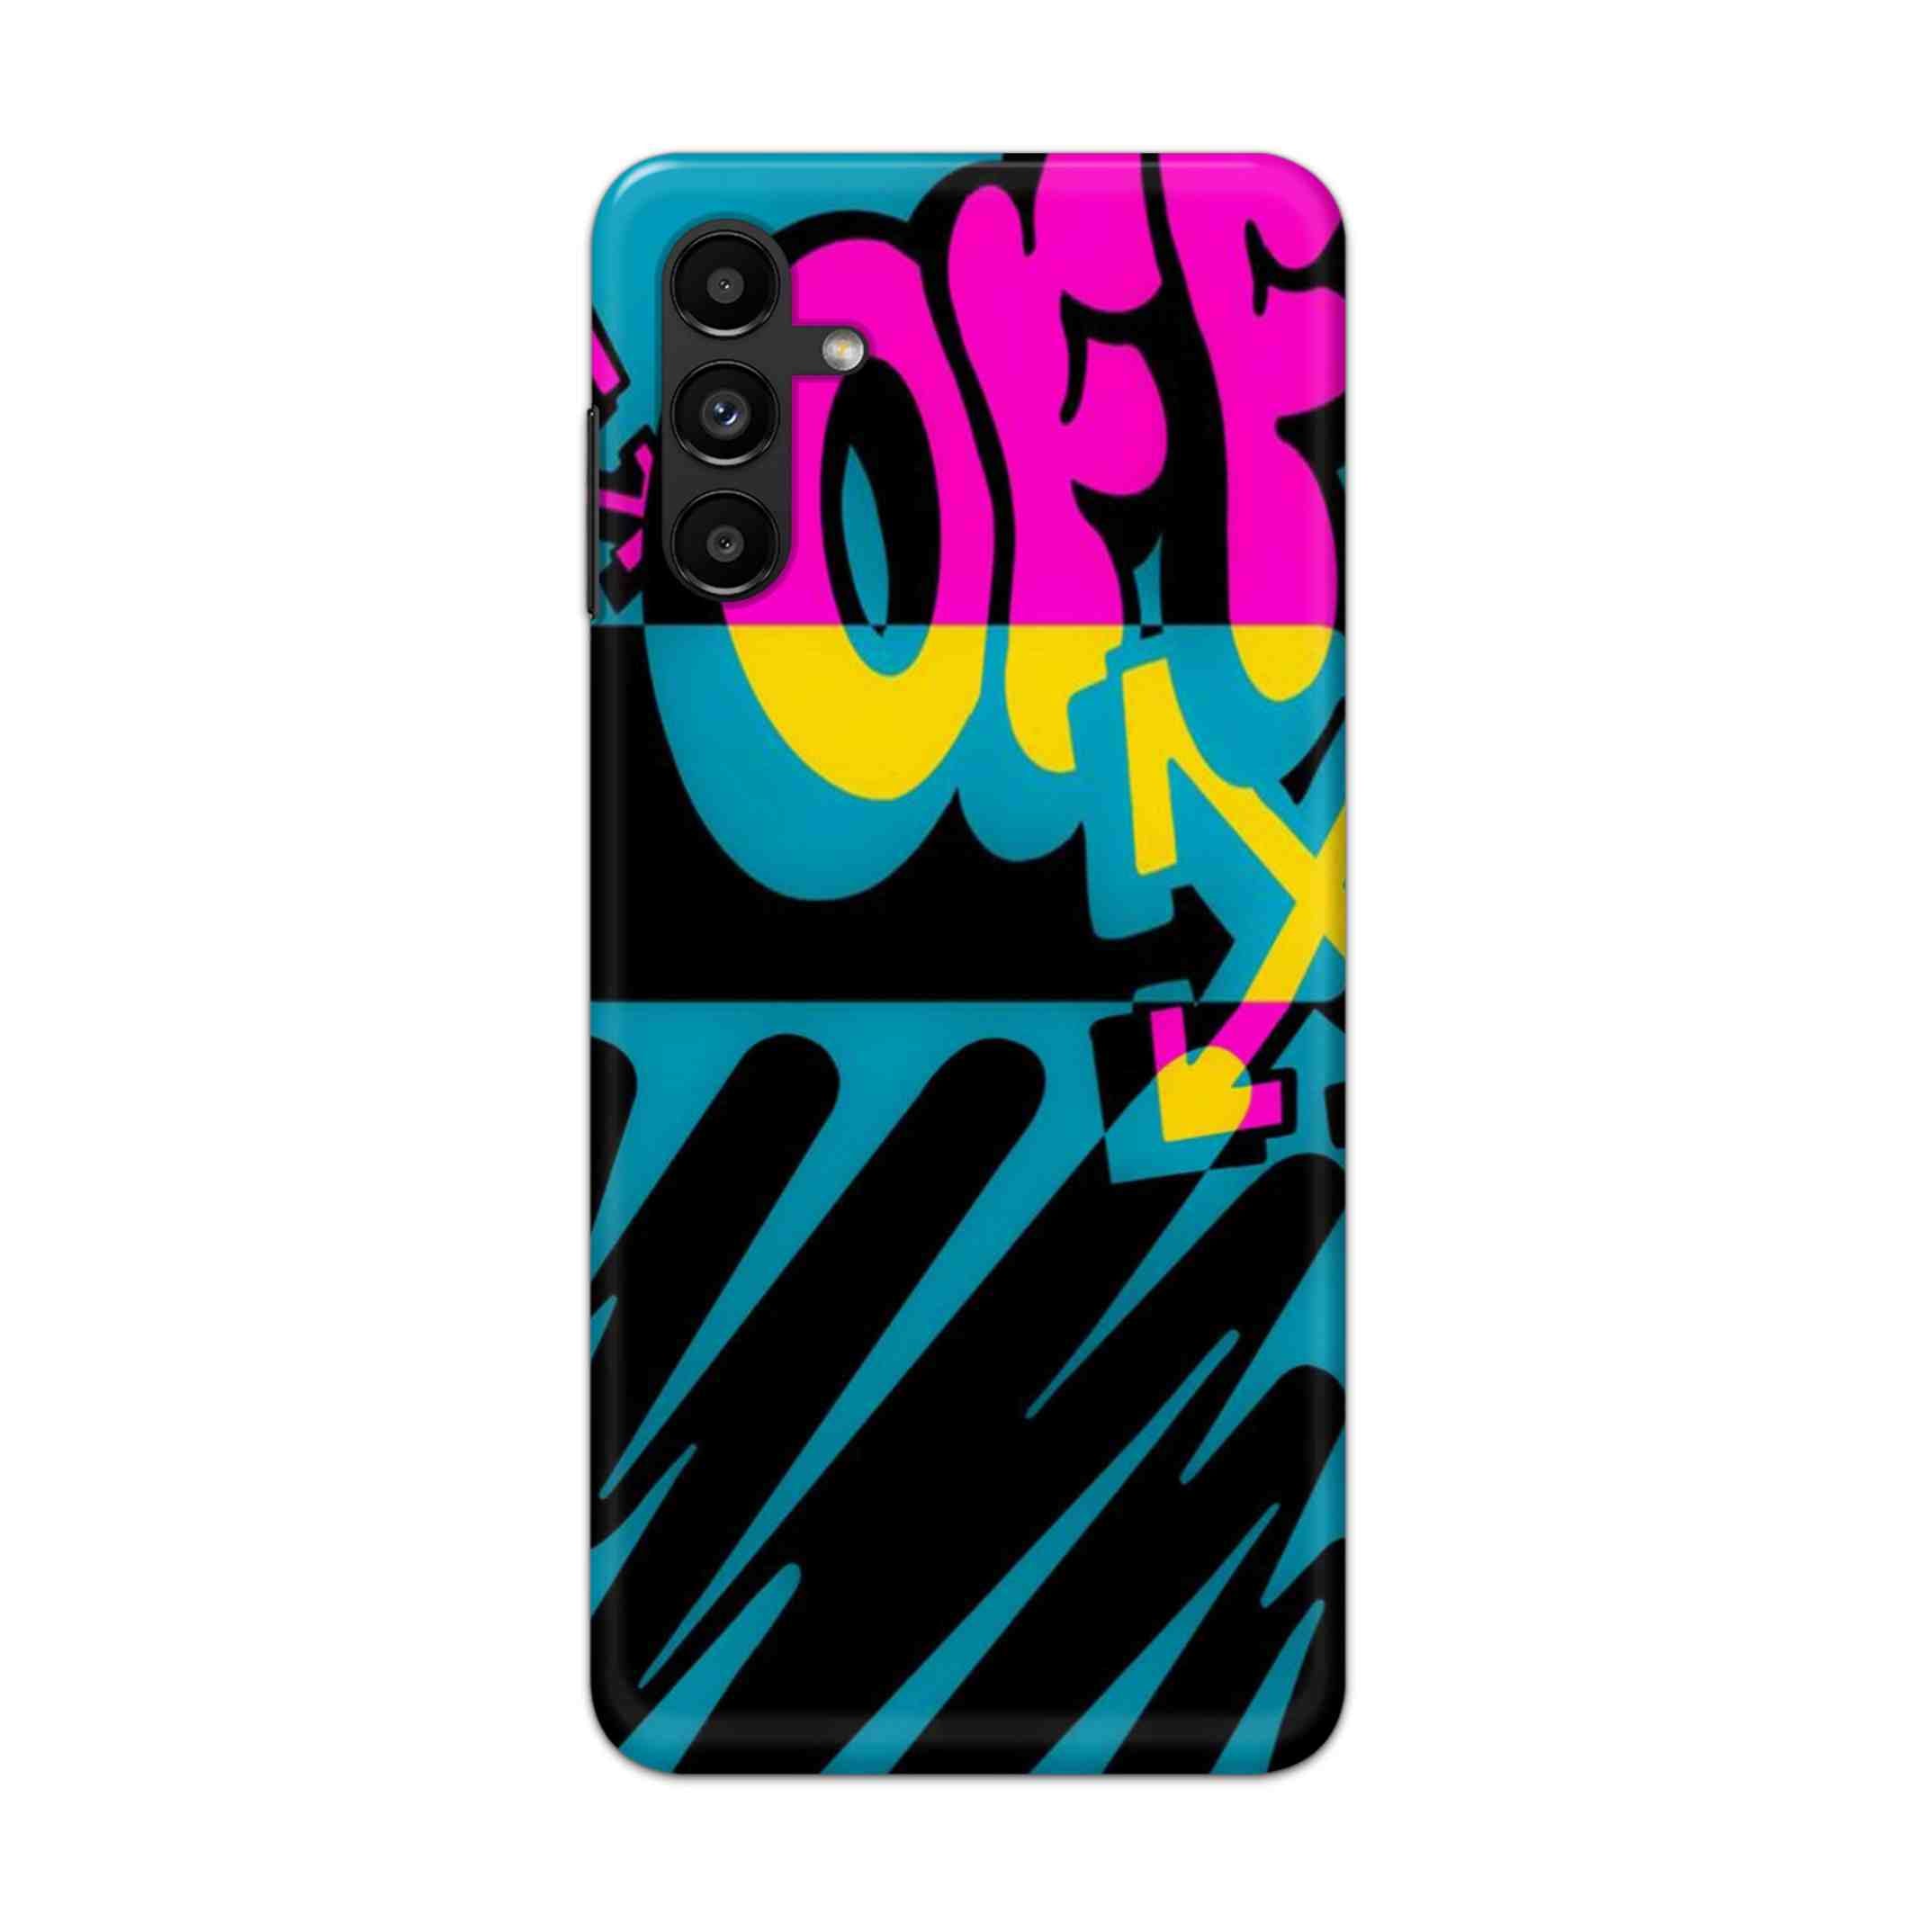 Buy Off Hard Back Mobile Phone Case/Cover For Galaxy A13 (5G) Online